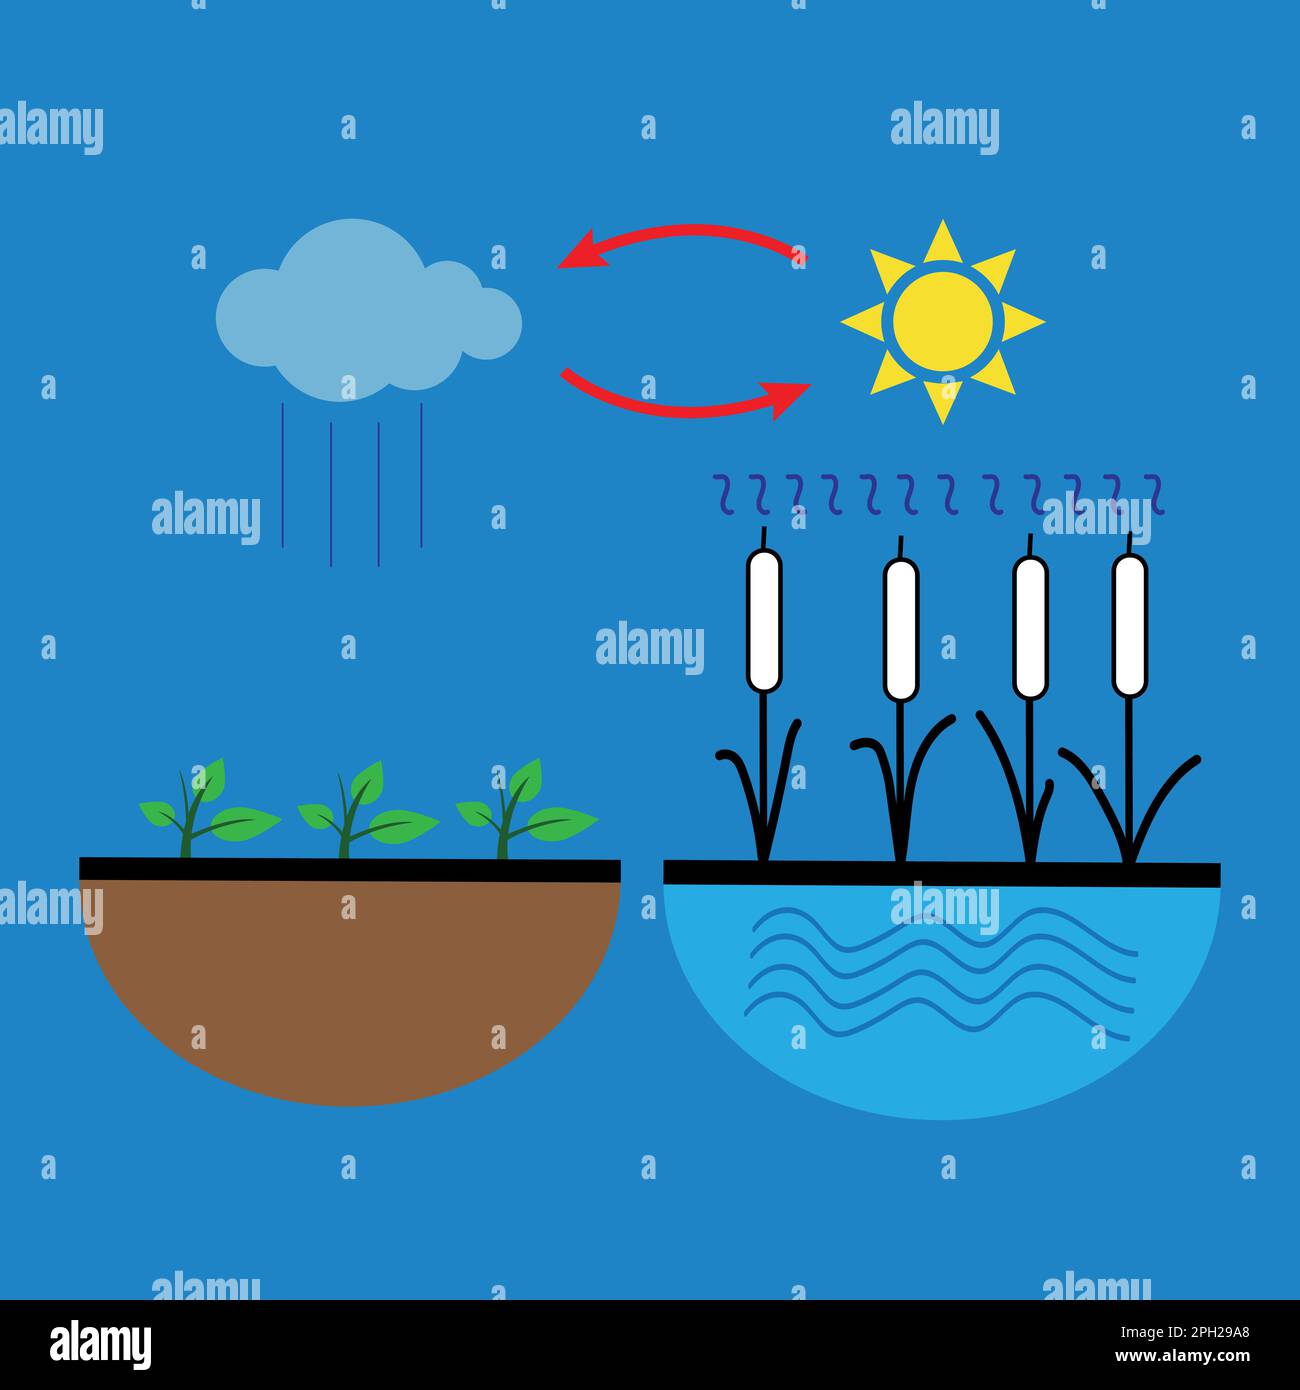 Vector schematic representation of the water evaporation process in nature Stock Vector